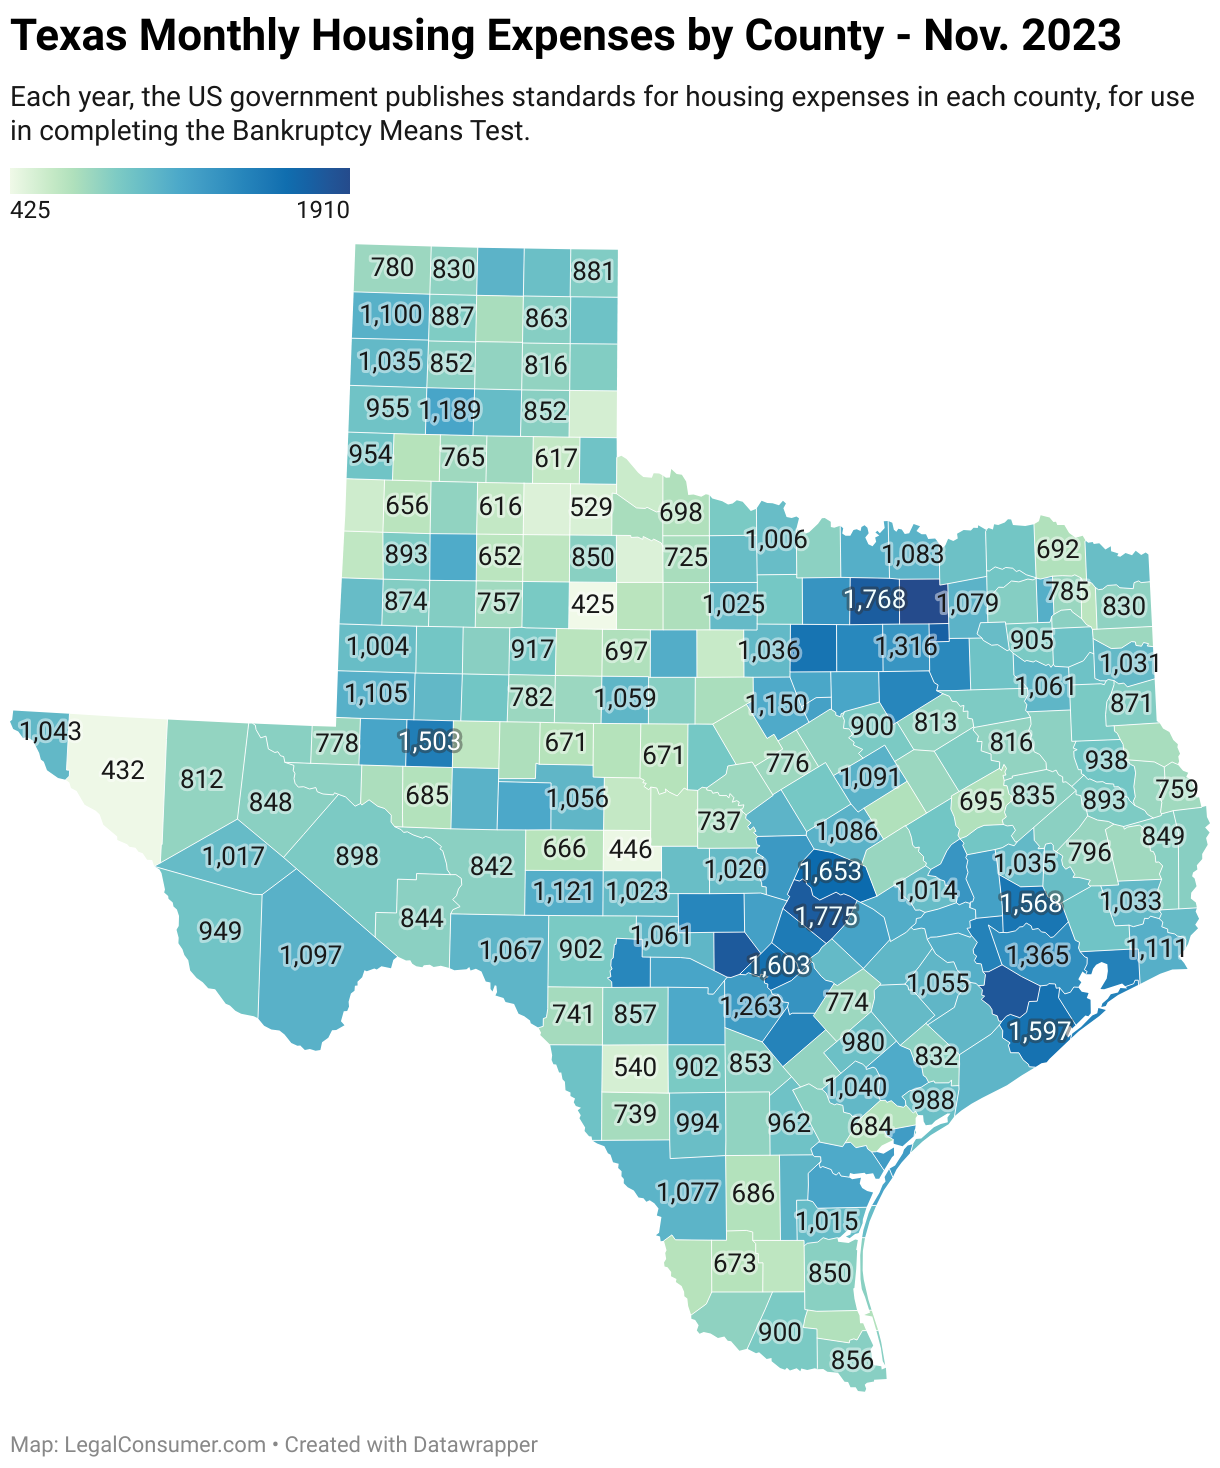 Map of Texas Housing Expenses for Bankruptcy Means Test